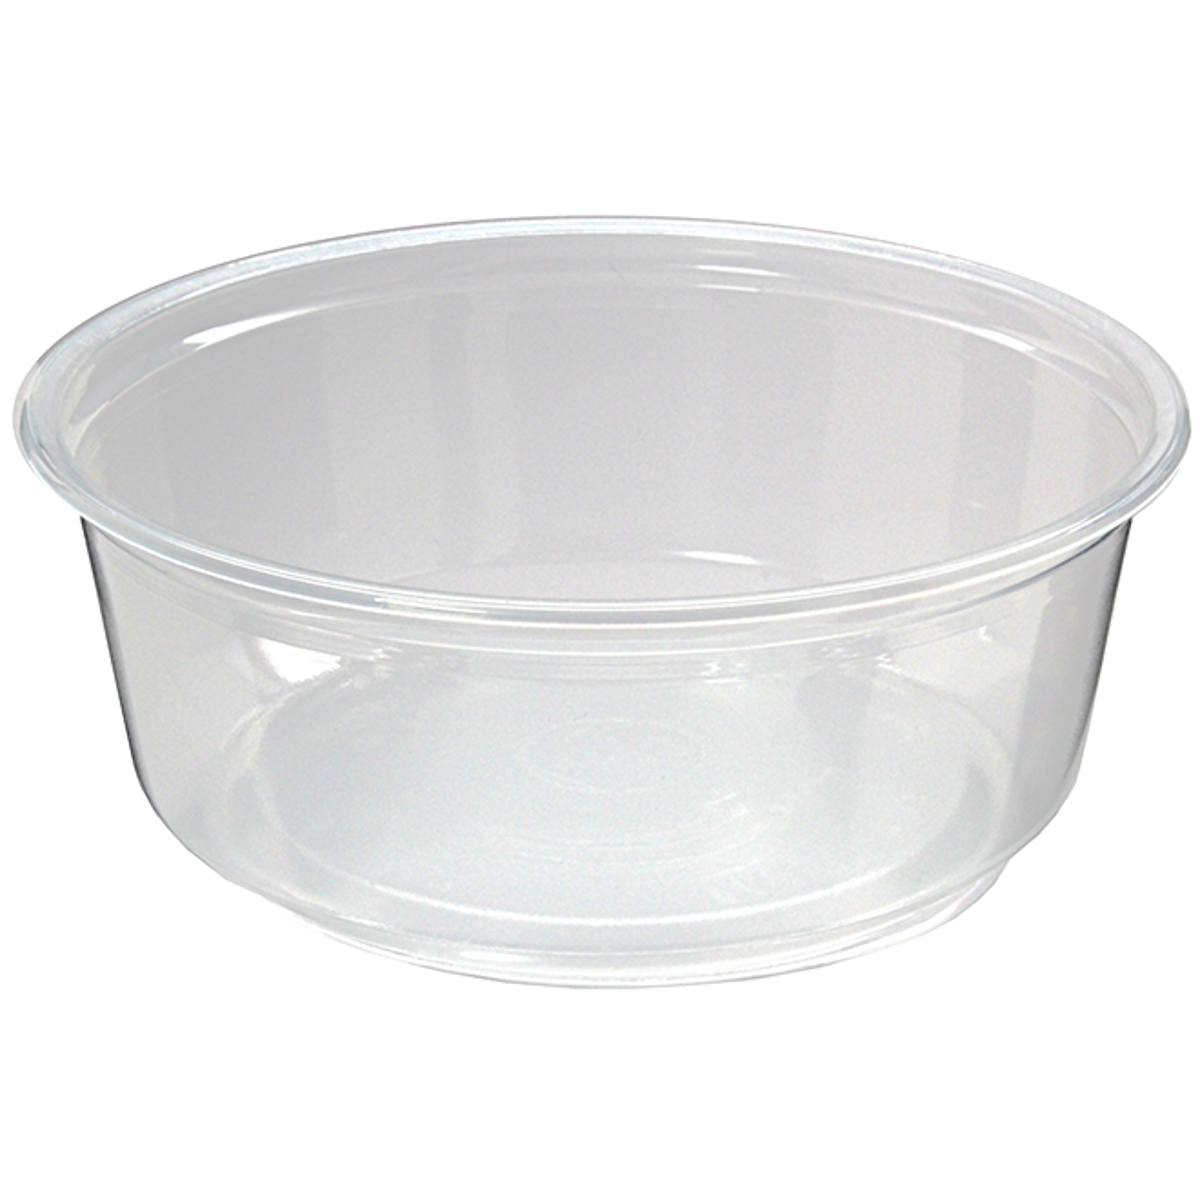 Pro-Kal 8 oz. Polypropylene Round Deli Containers | Pactiv Evergreen